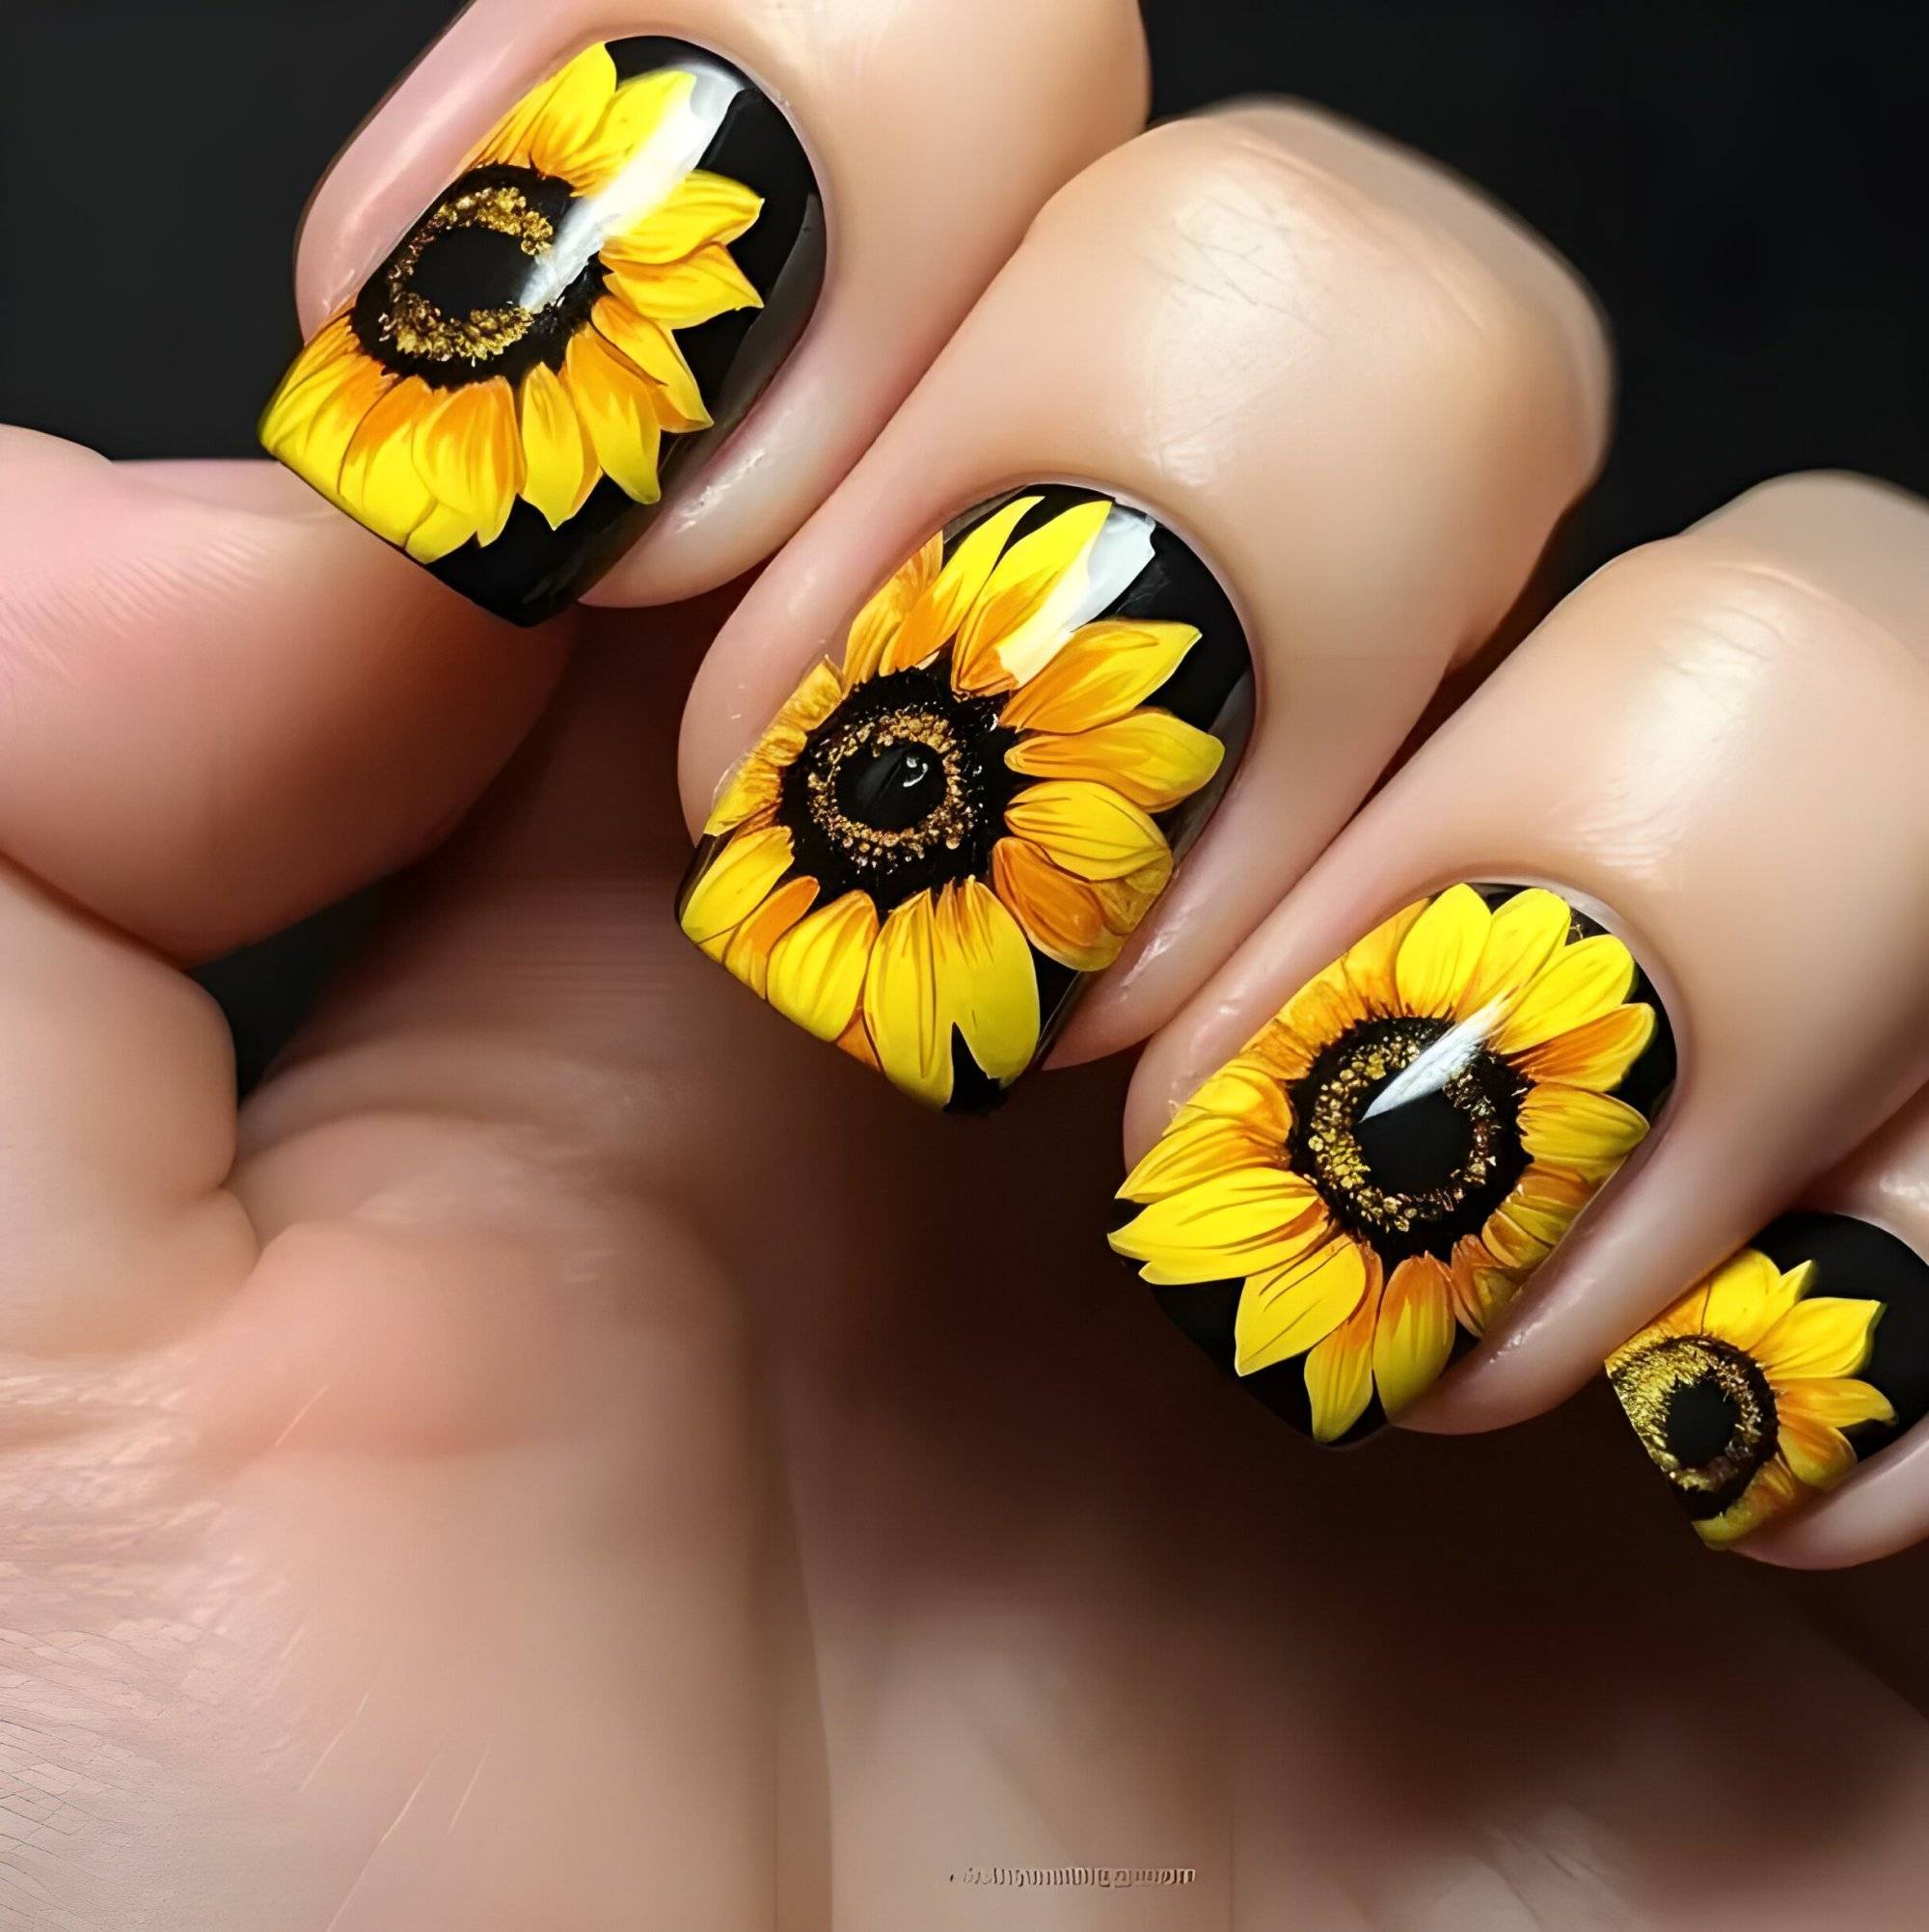 25 Trendy Summer Sunflower Nails For Beginners To Copy ASAP - 179